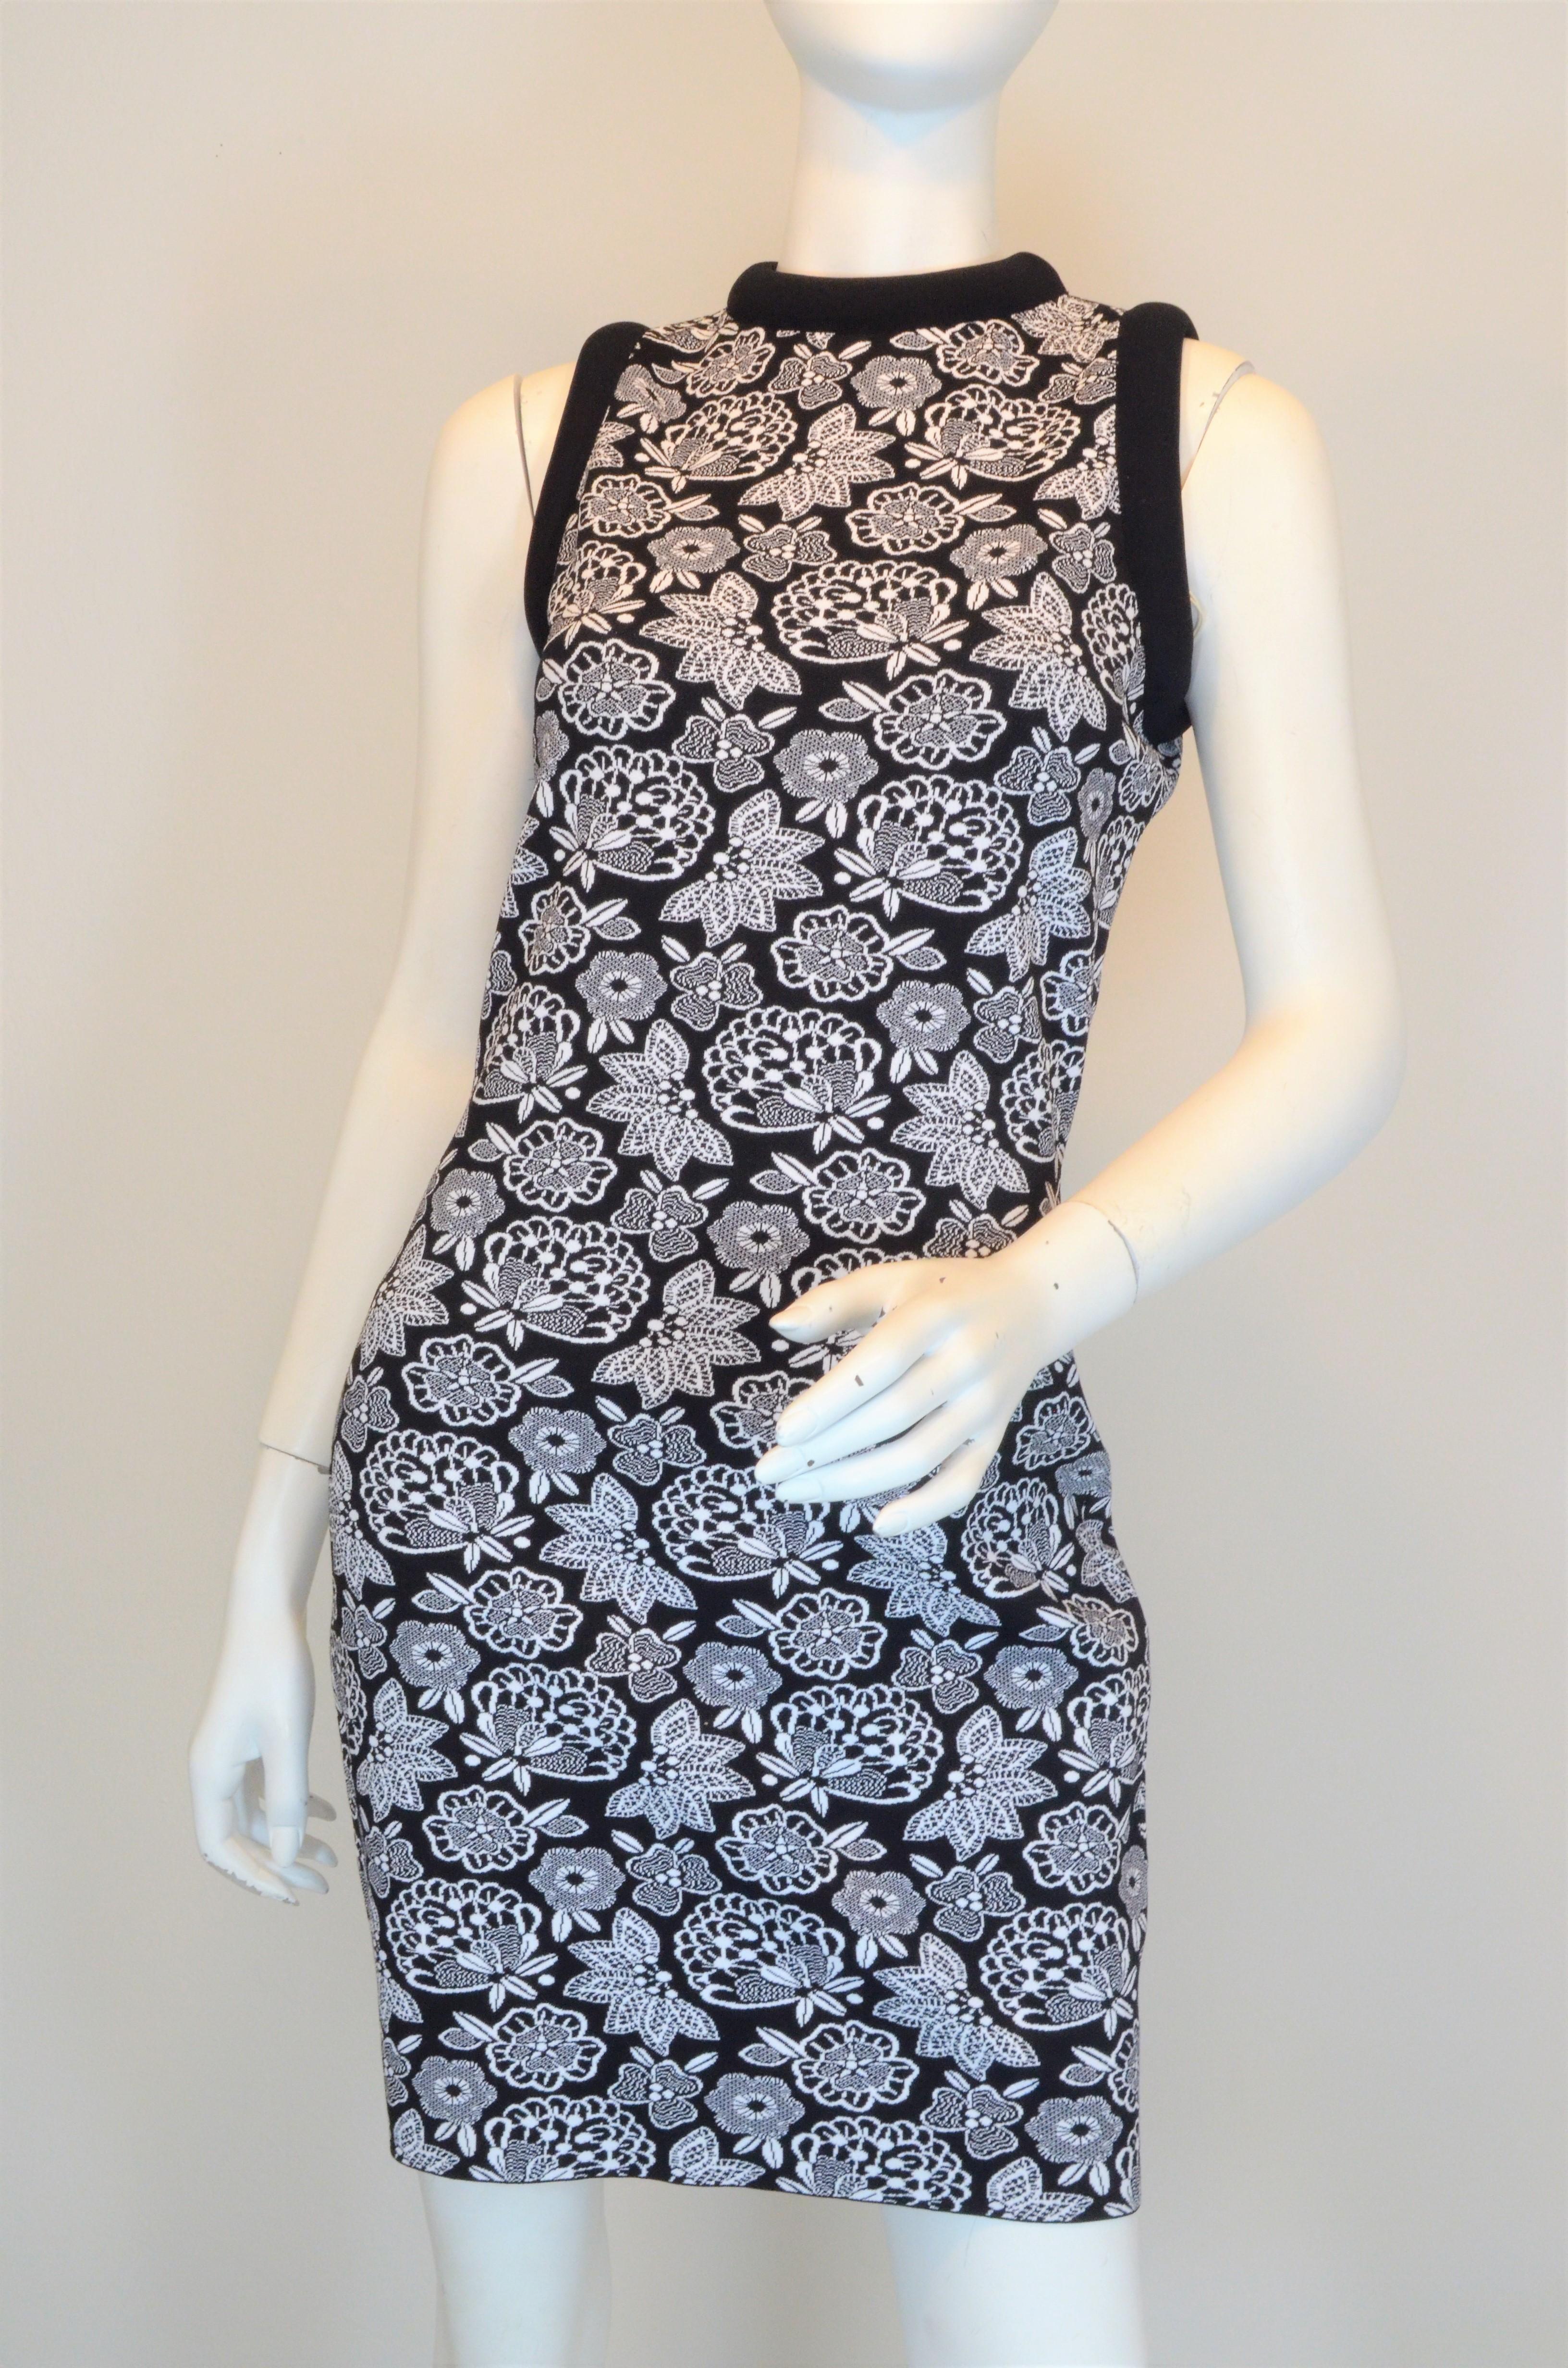 Christopher Kane black and white floral print knitted dress composed with a fitted knit fabric, tubed neck opening, and a back zipper fastening. Dress is a size 6, made in Italy.

Measurements:
Bust 32”, waist 28”, hips 34”, length 35”